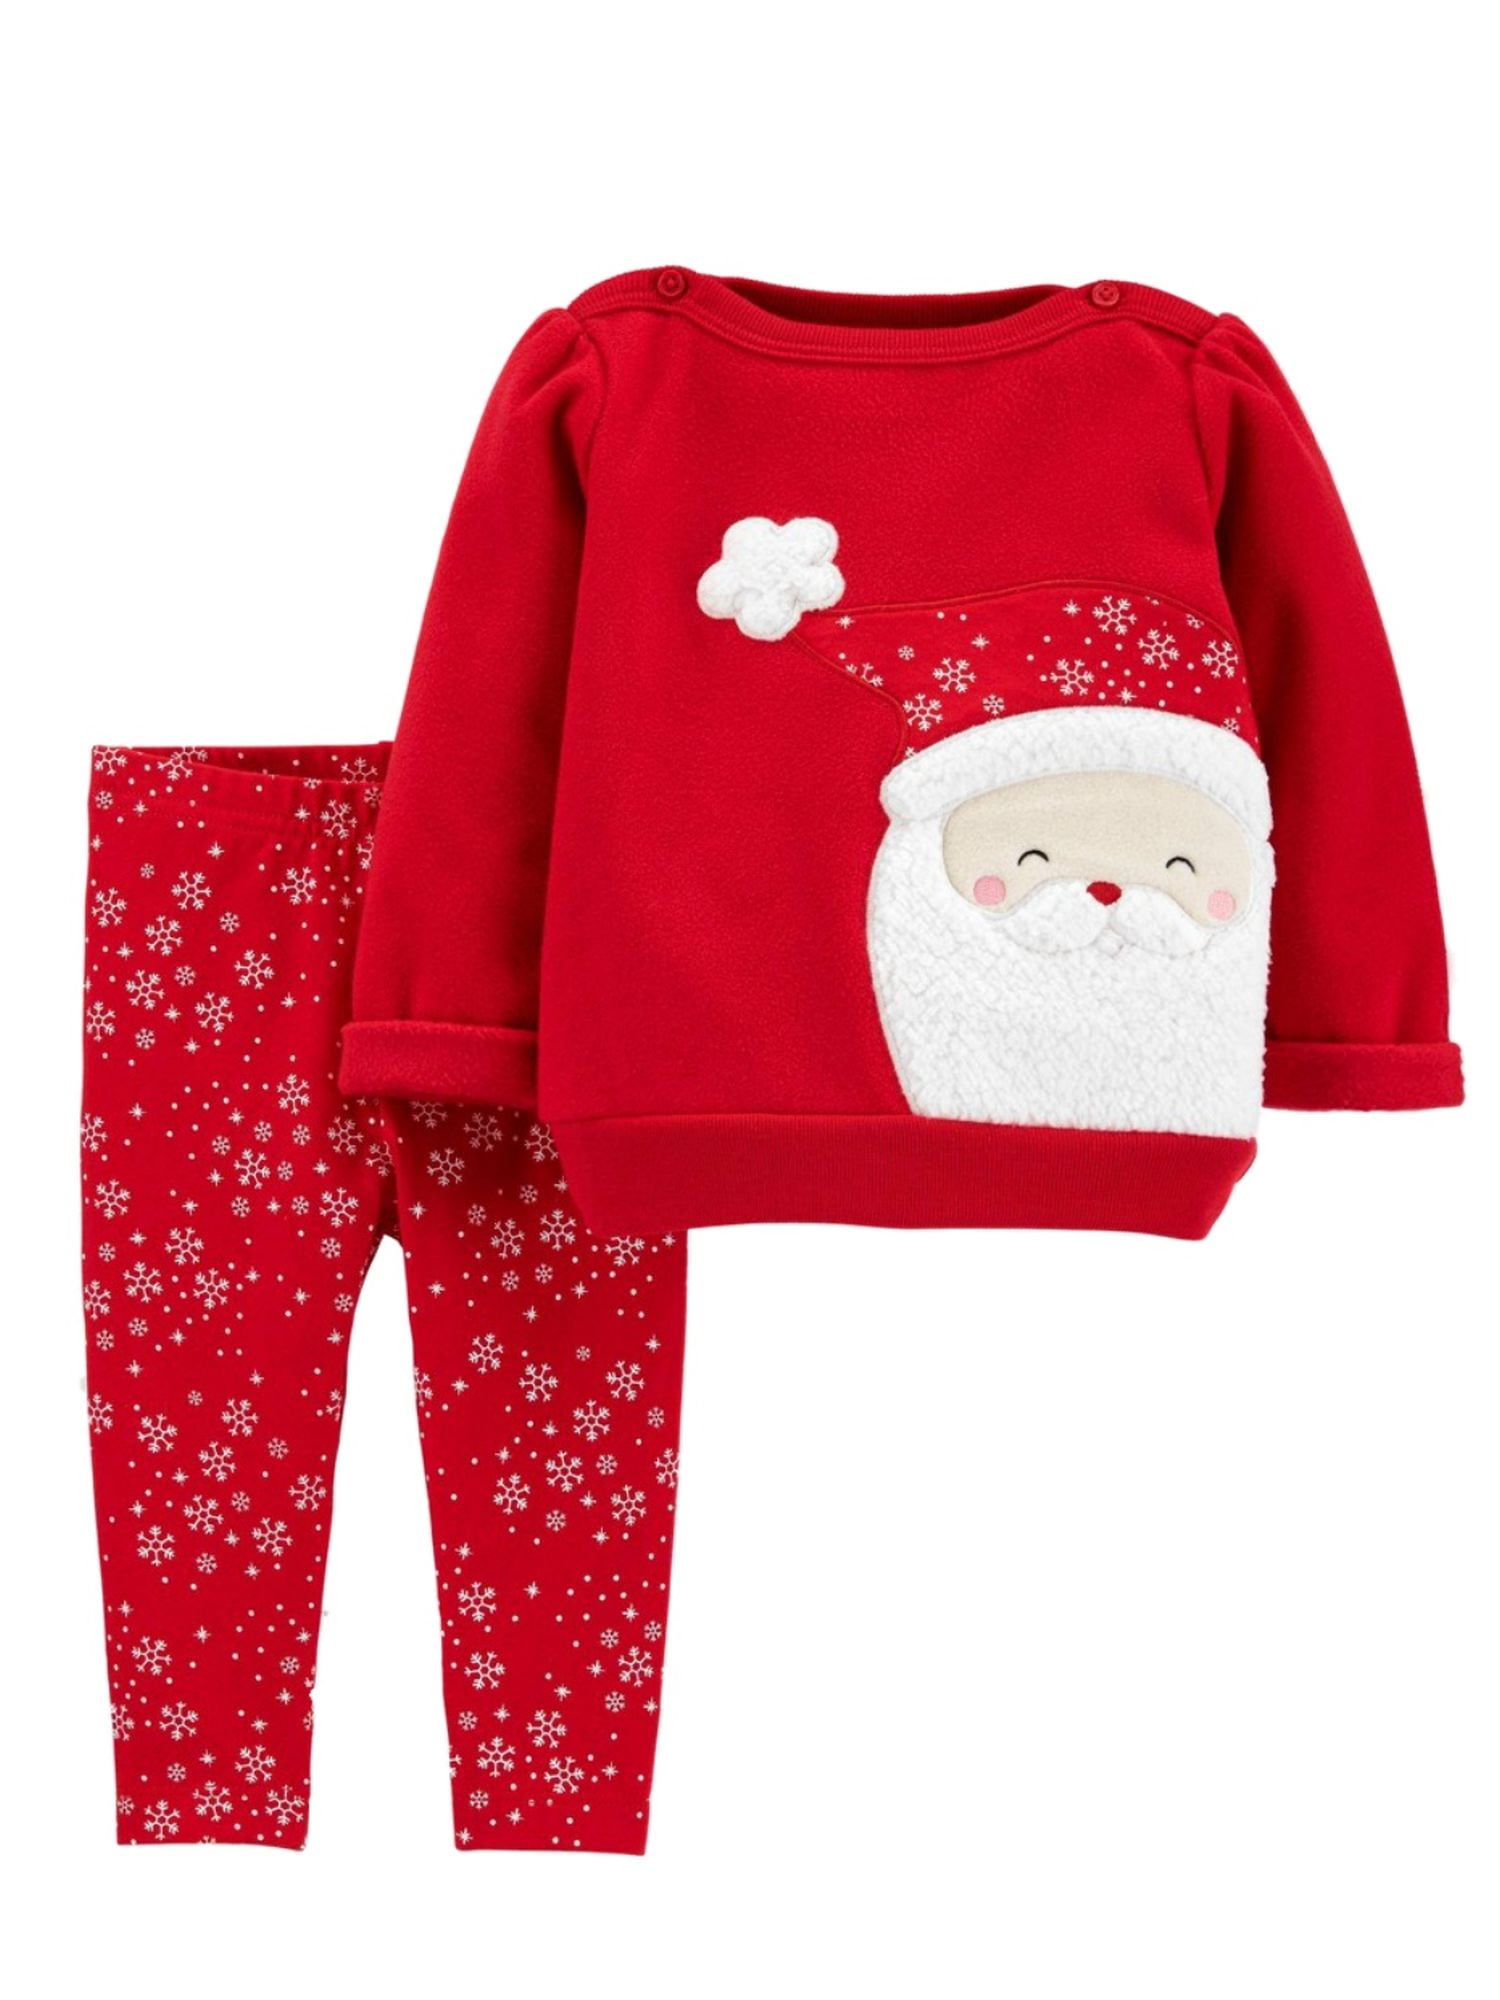 Carters Baby's First Christmas Santa Infant Sleeper SIZES Newborn, 3 Months 